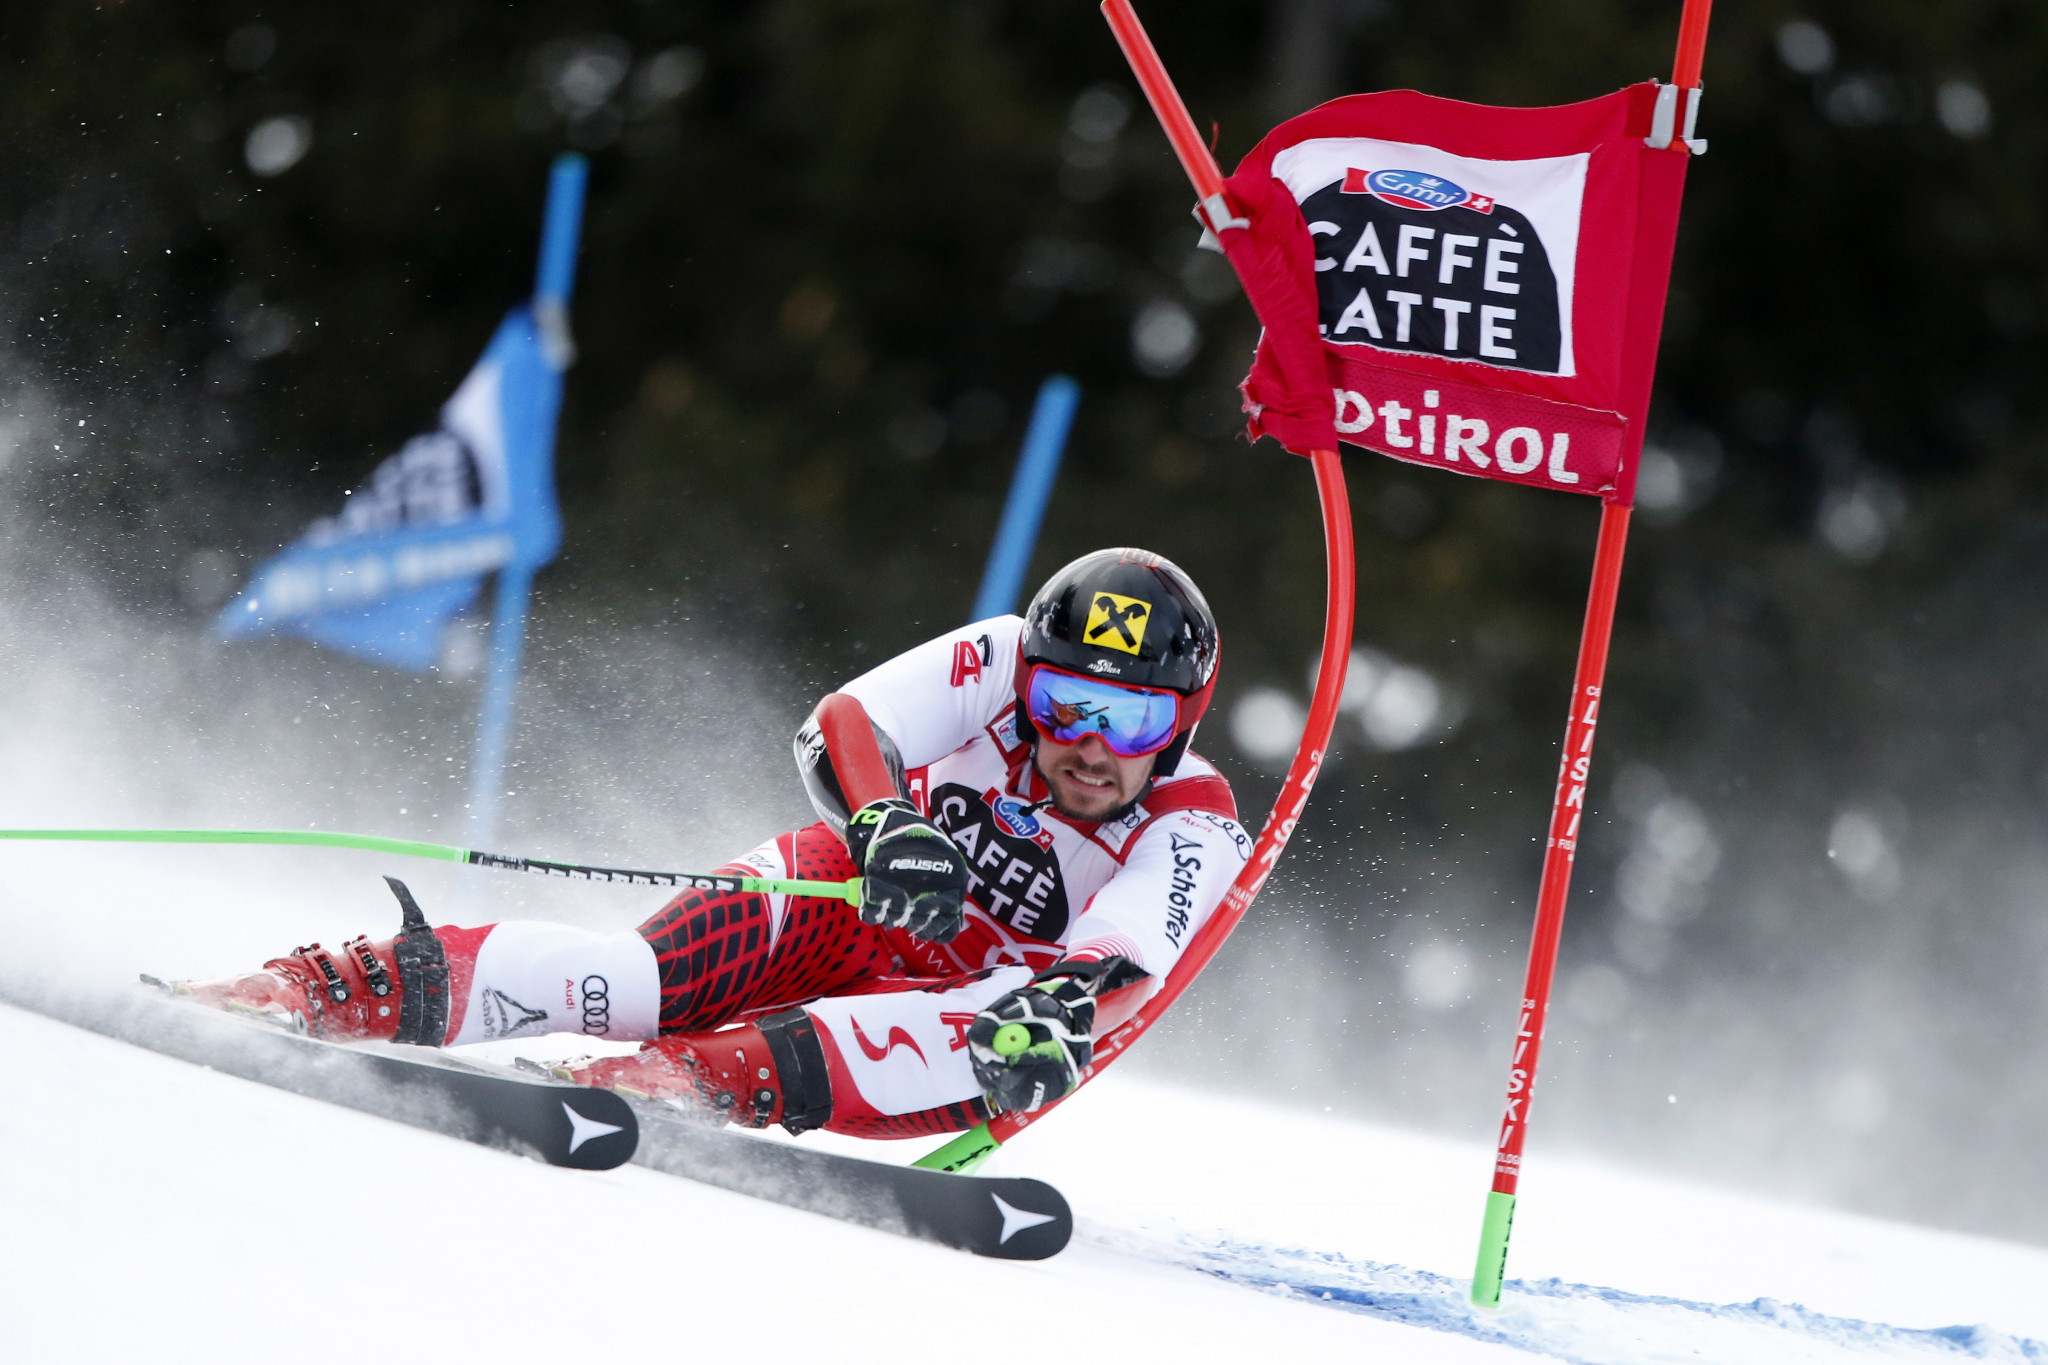 Austria's Marcel Hirscher finished two and a half seconds ahead of the nearest challengerin today's FIS World Cup giant slalom in Alta Badia ©FIS